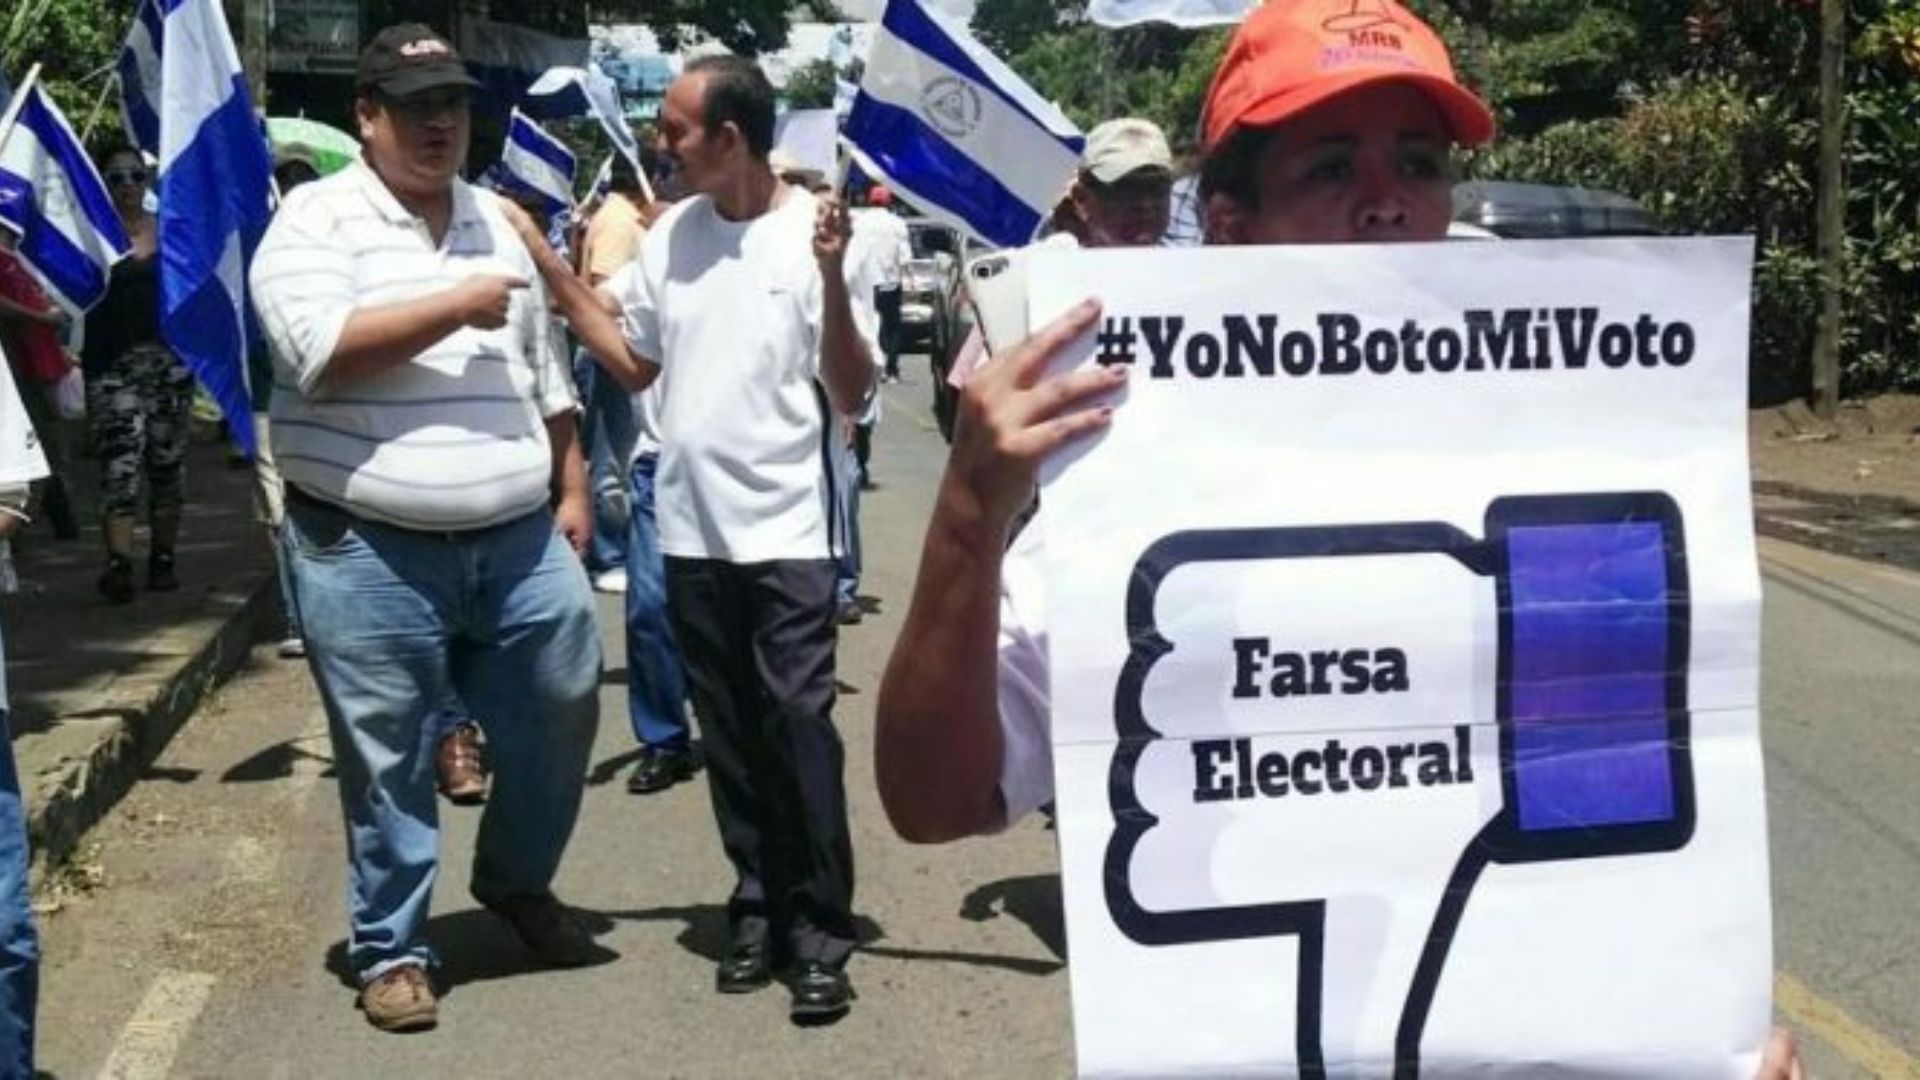 Nicaraguans in Costa Rica will march on November 6 in rejection of Ortega's "electoral farce"